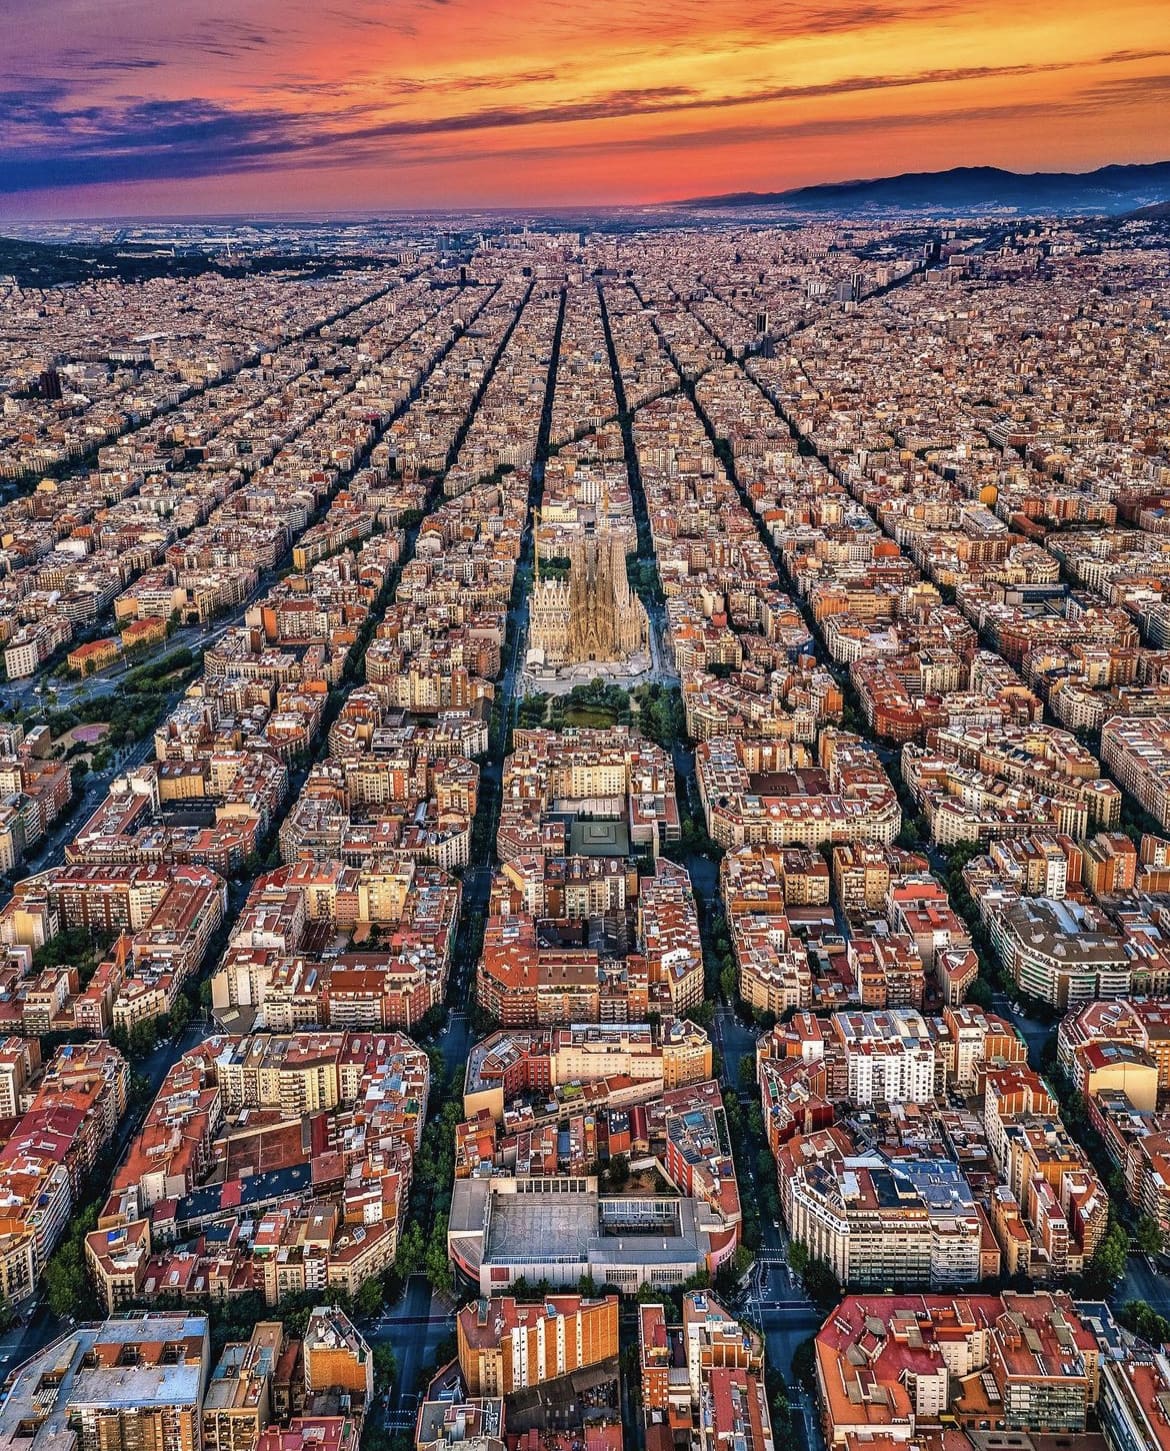 Aerial view over Barcelona's perfect rows of tower blocks